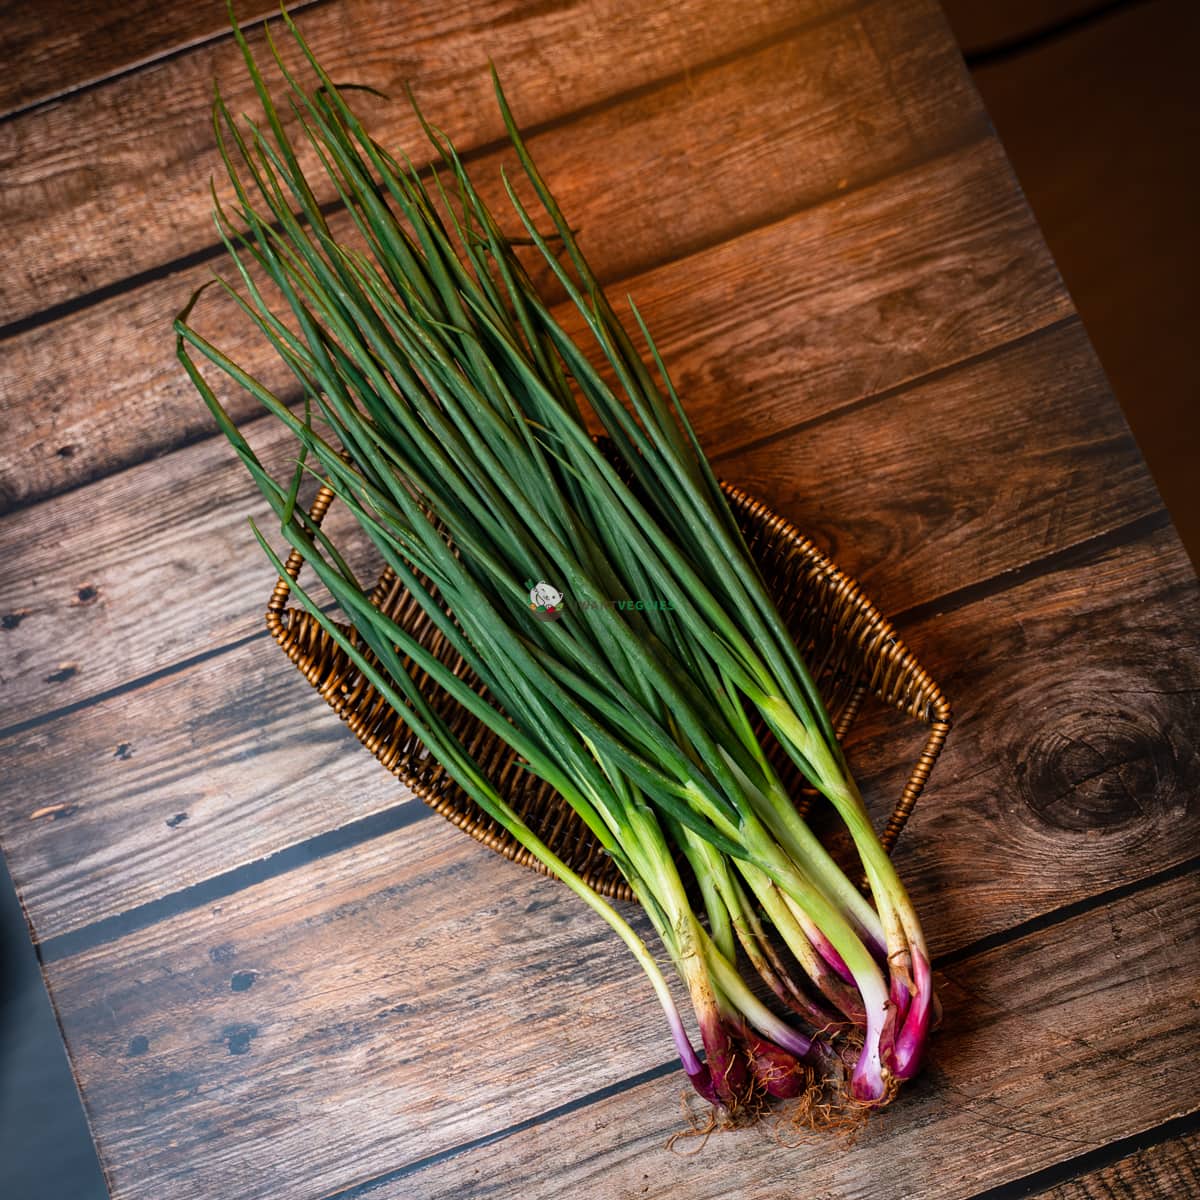 Fresh spring onions in basket on wood surface. Green stalks with purple bulbous ends.